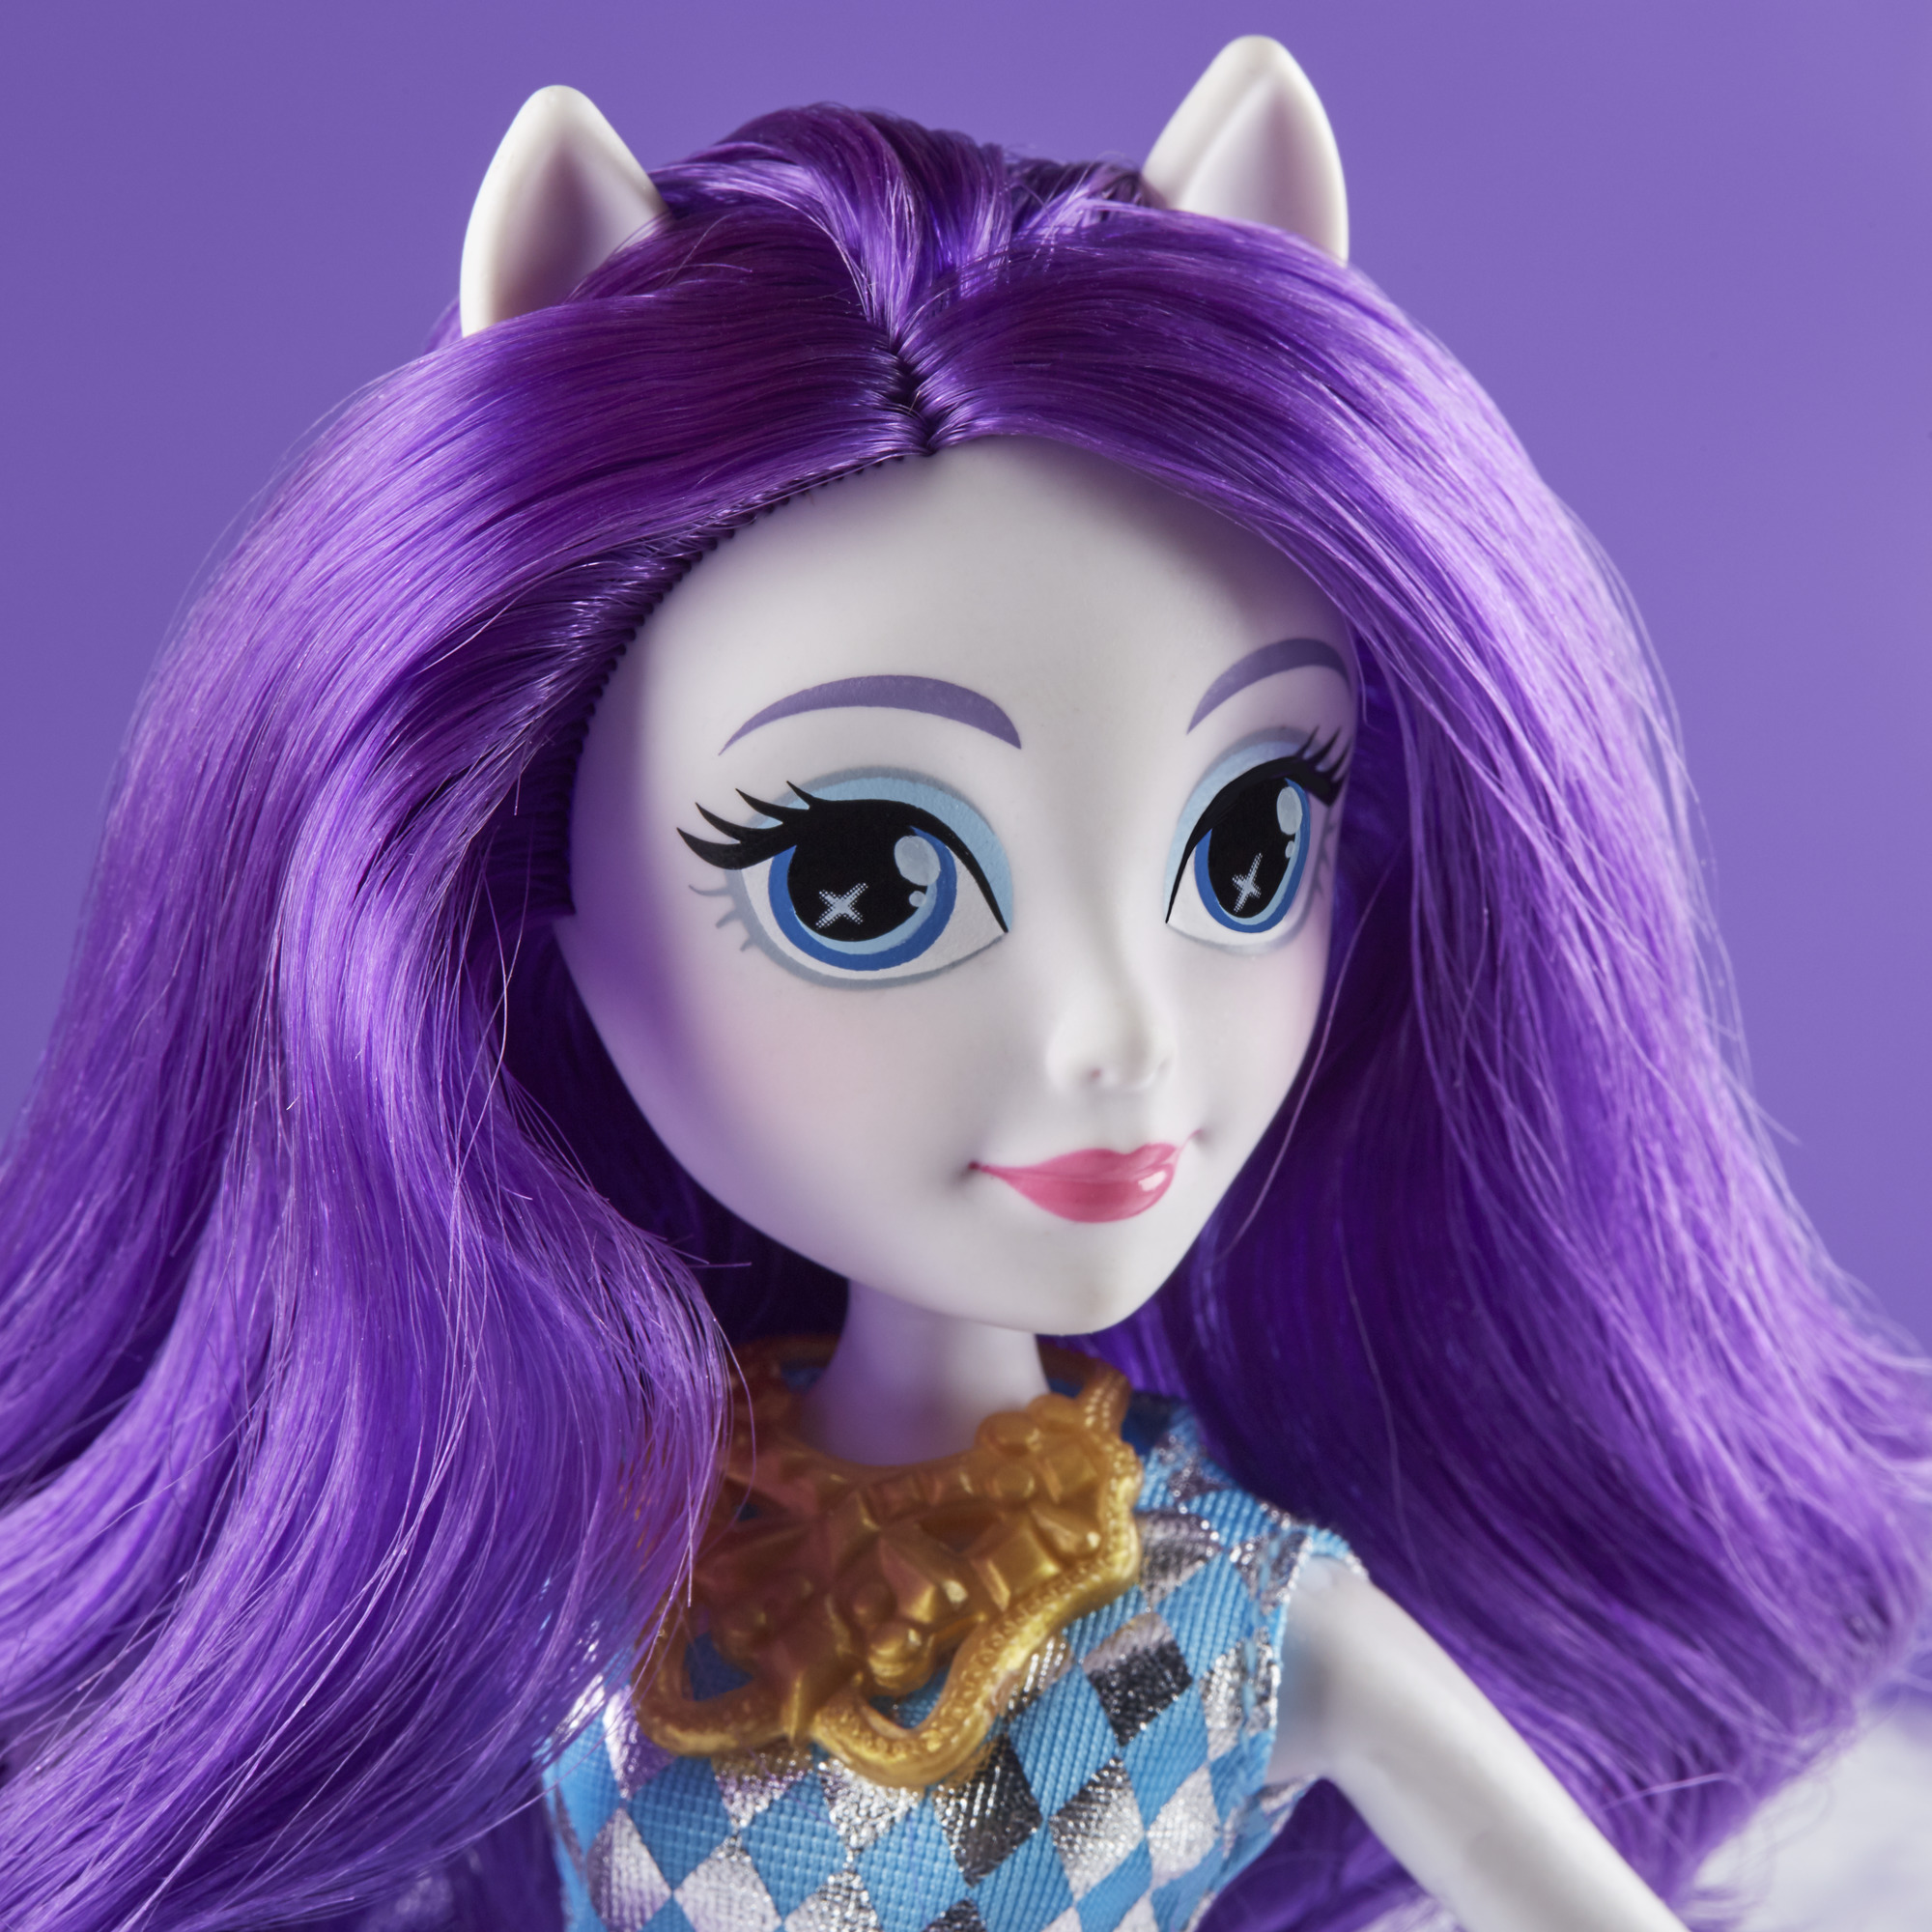 My Little Pony Equestria Girls Rarity Classic Style Doll - image 9 of 9